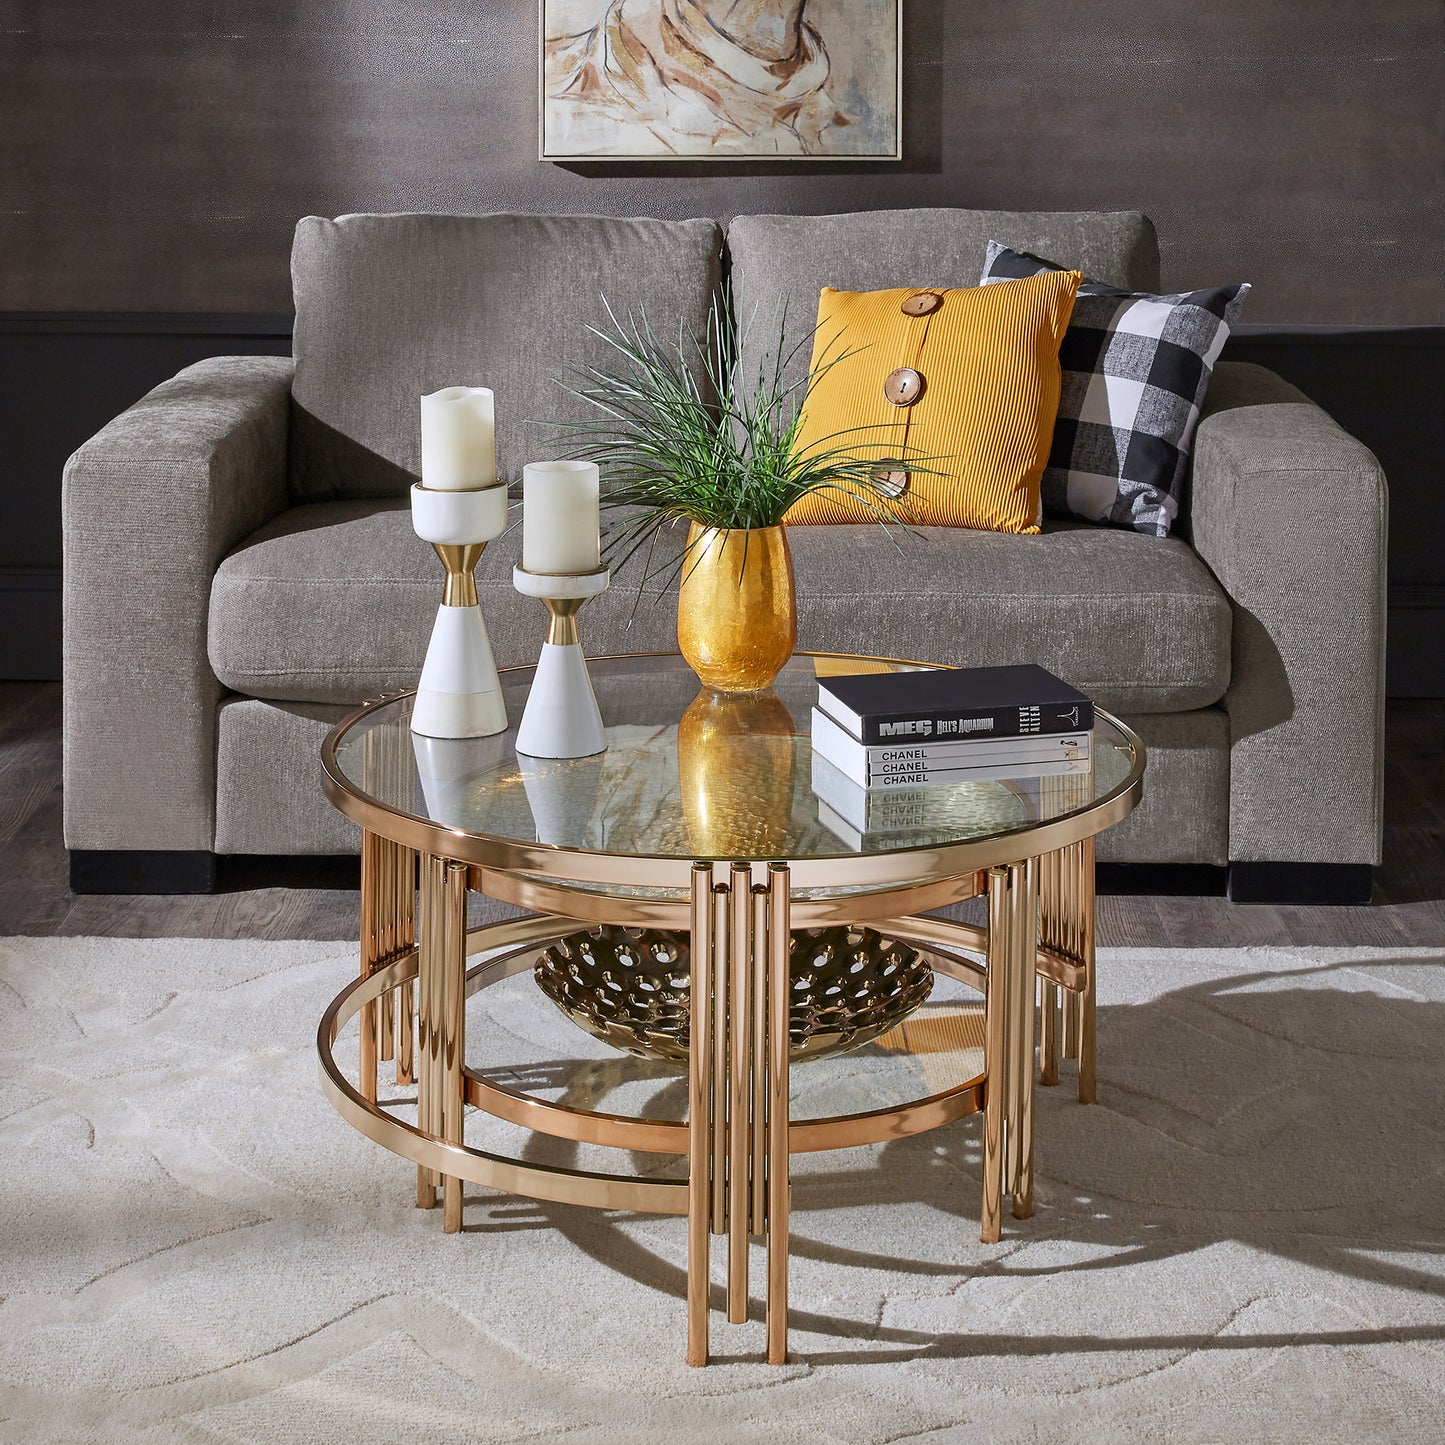 Champagne Gold Finish Textured Glass Table with Shelf - Nesting Coffee Table